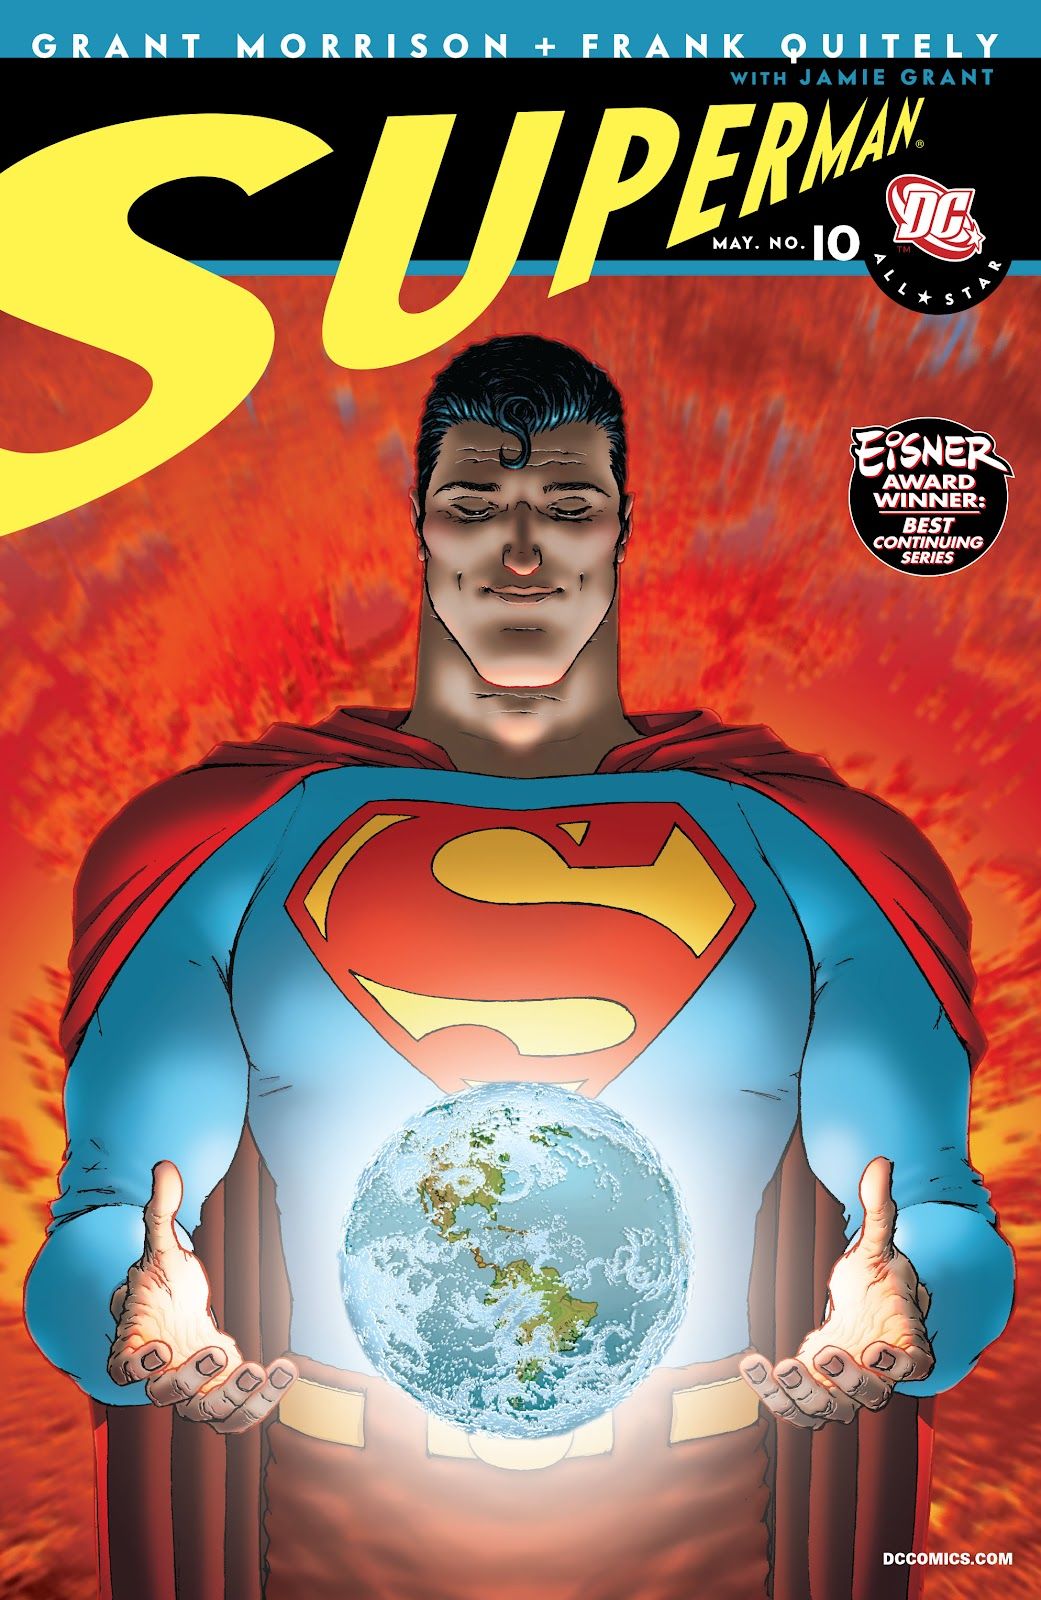 The cover of All Star Superman #10